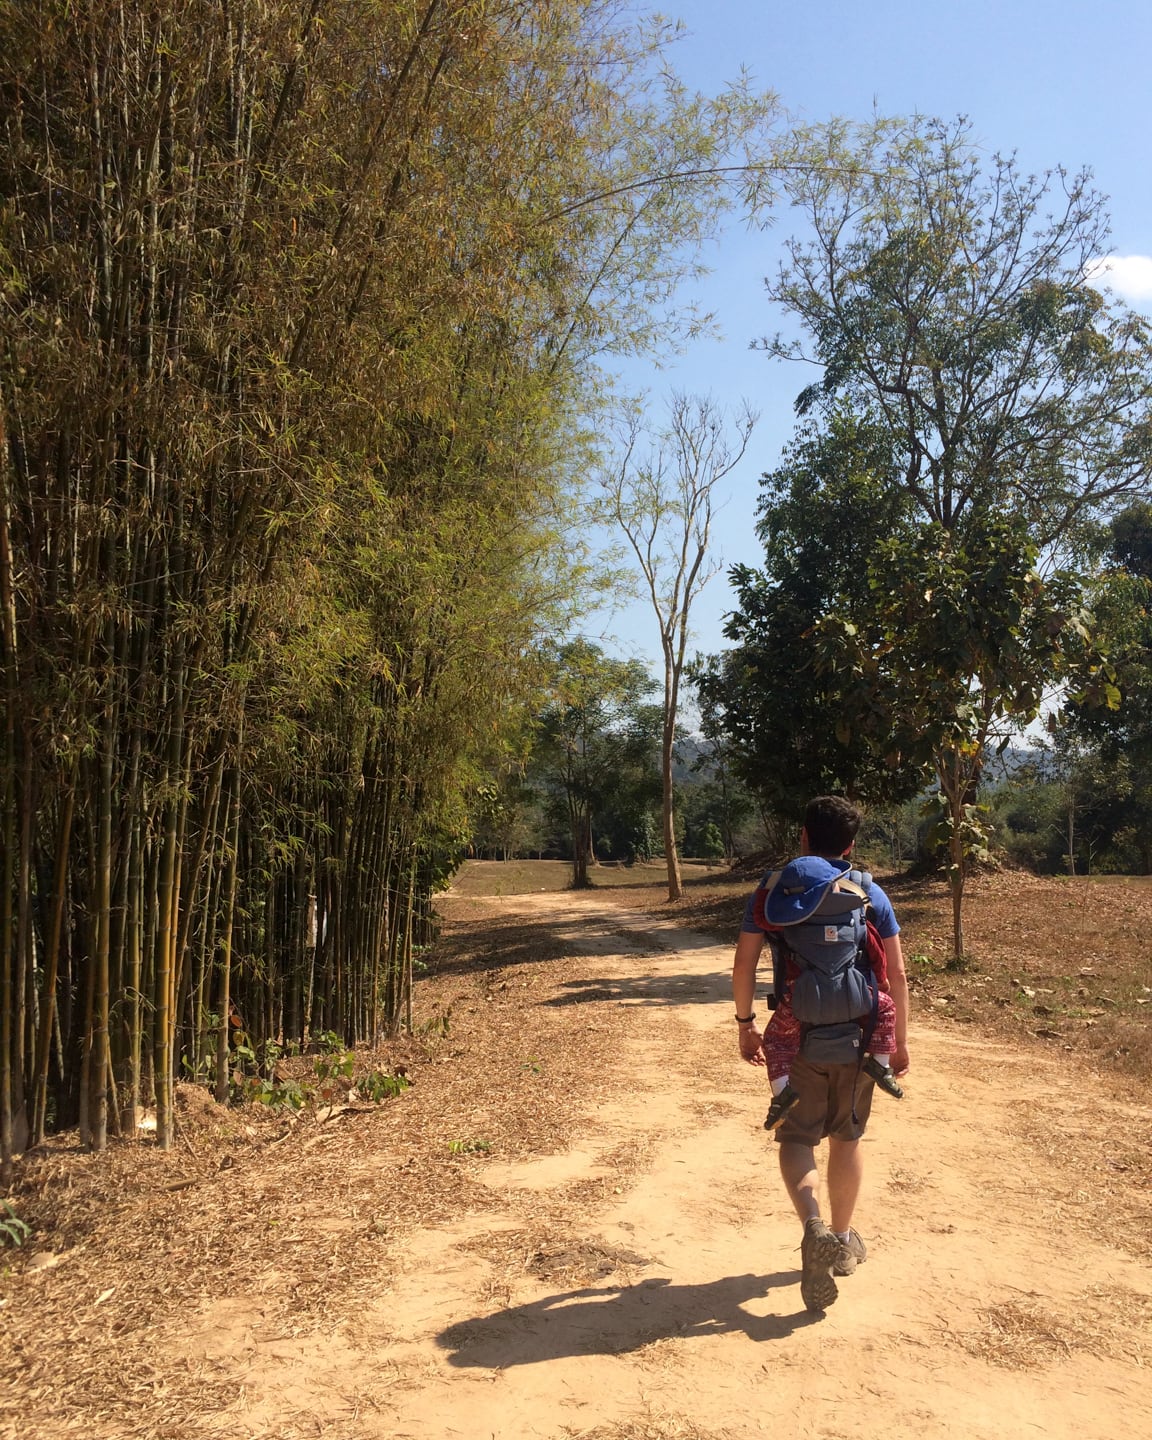 walking near bamboo with baby